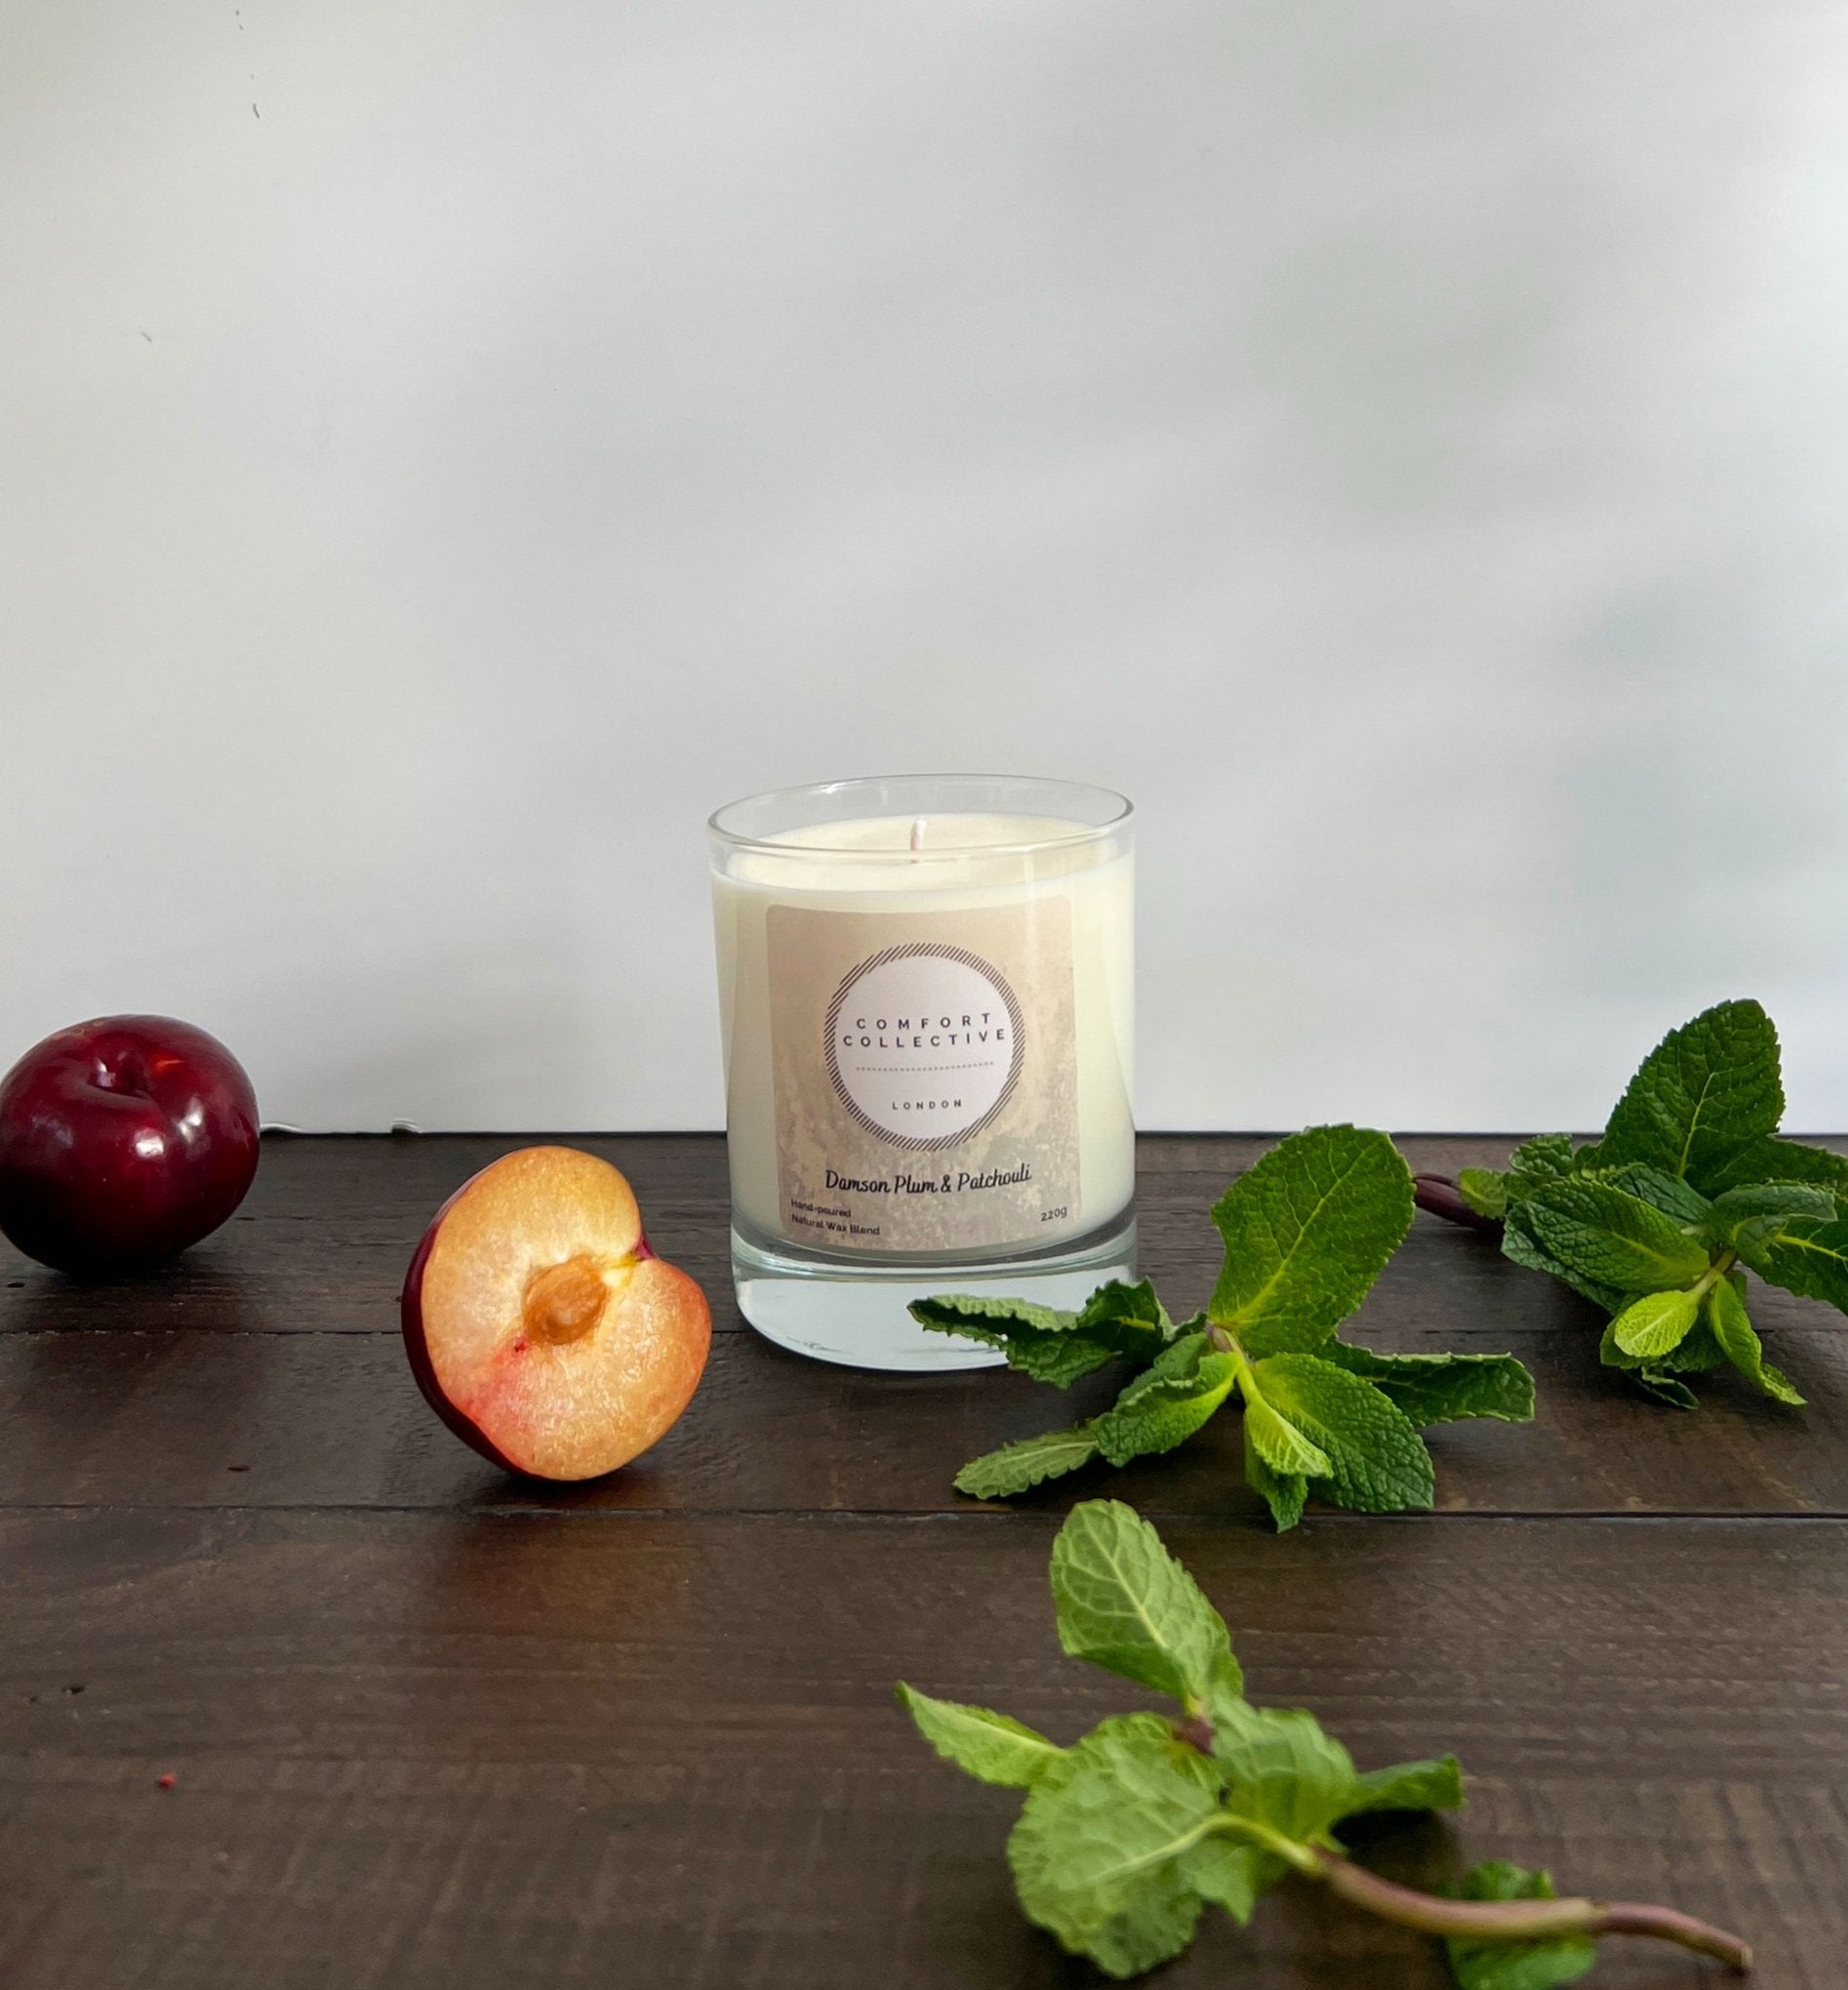 Hand Poured Candle -Signature Collection -  Damson Plum & PatchoulI by Comfort Collective London